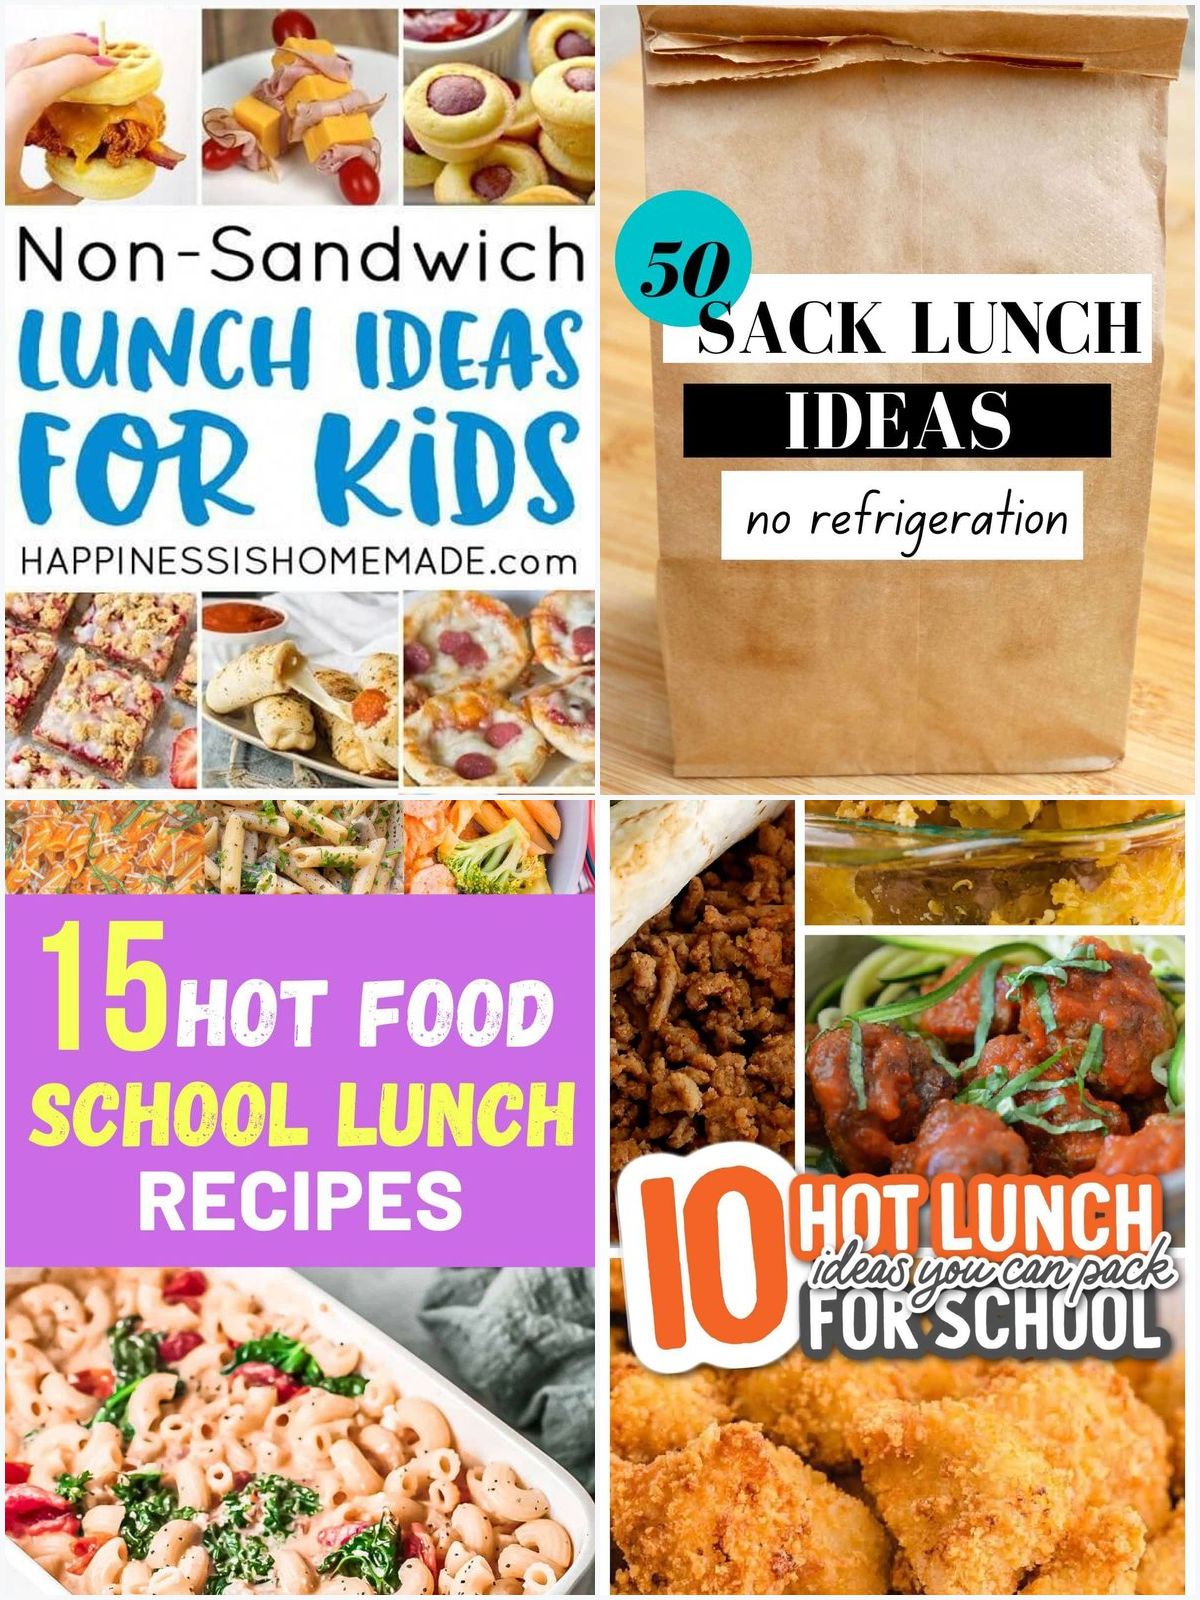 My favorite ideas for hot food school lunch